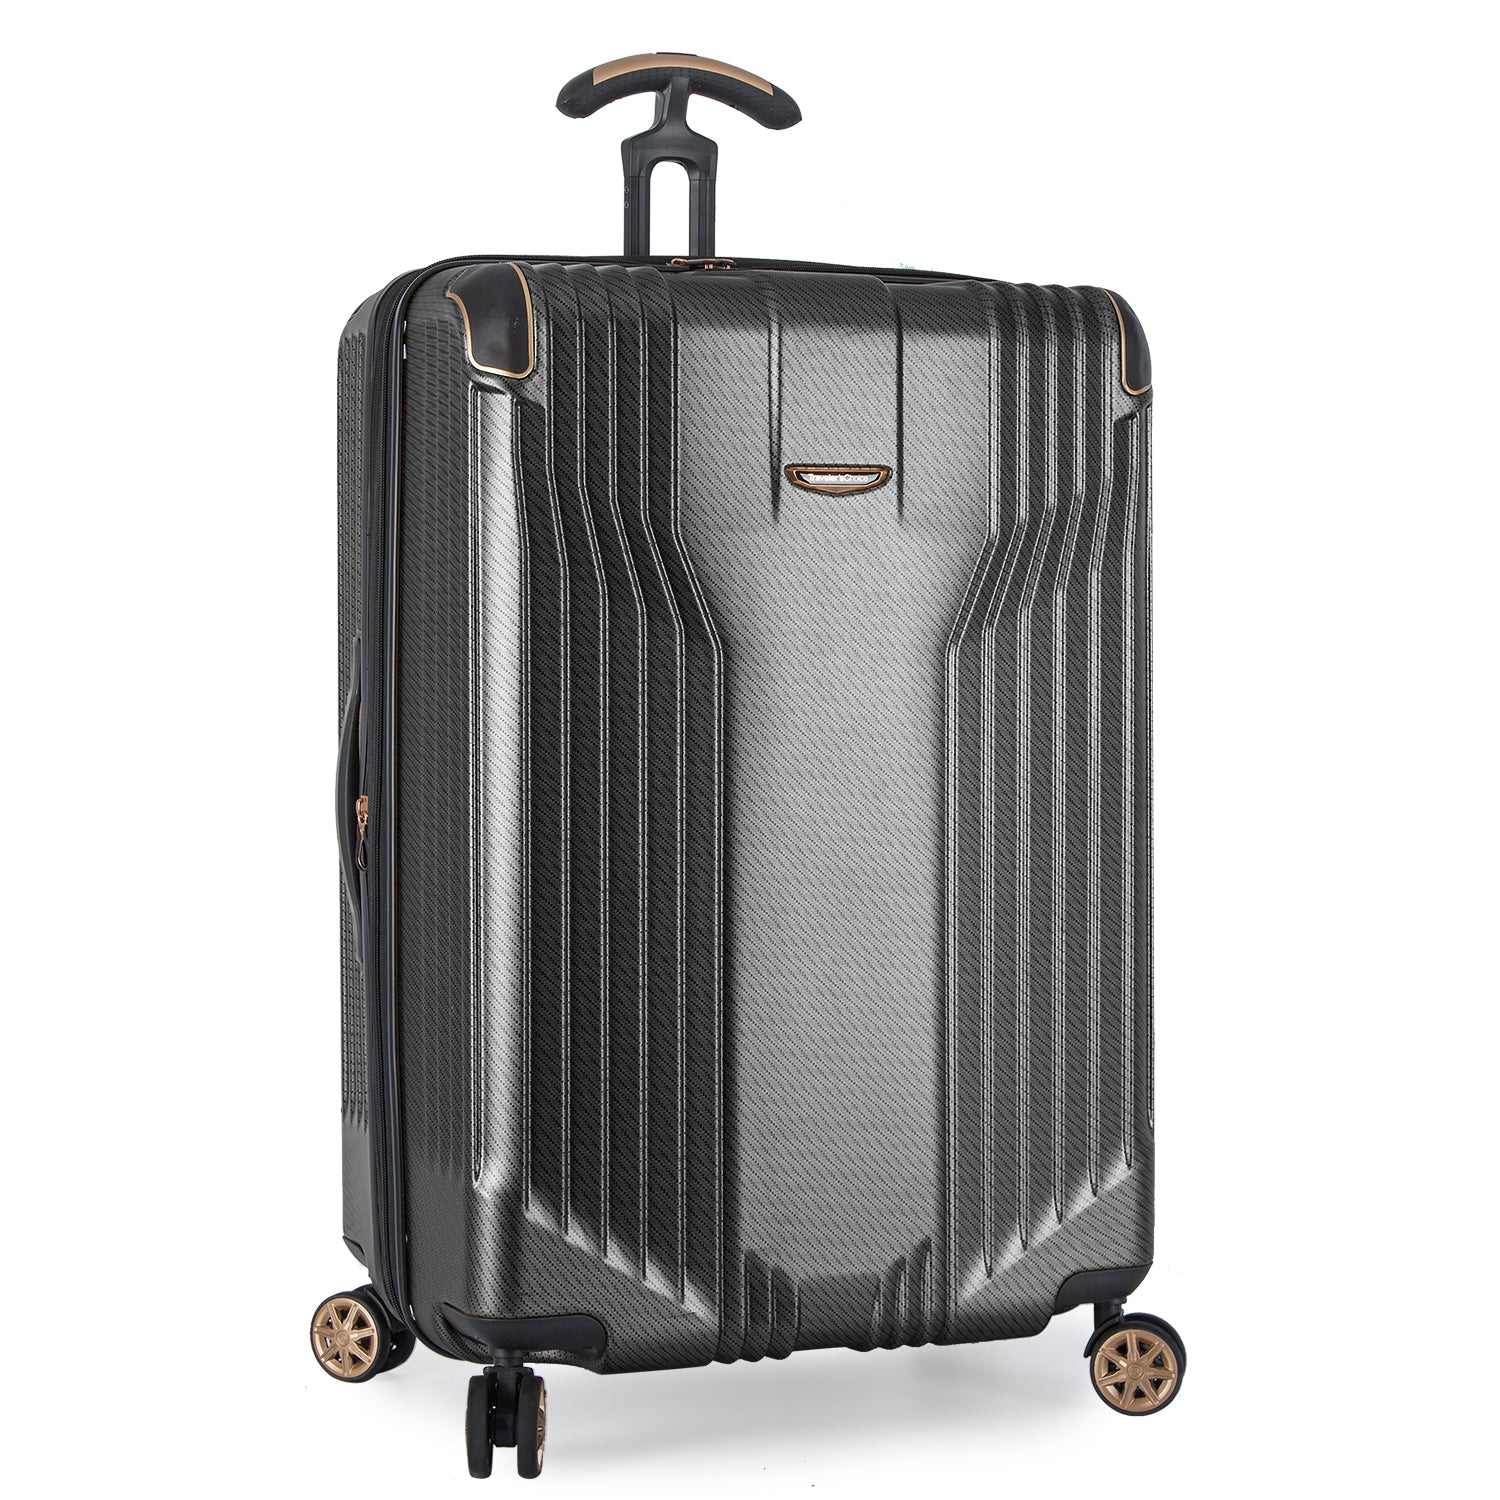 Continent Adventurer Large Checked Luggage Suitcase with 4 Spinner Wheels